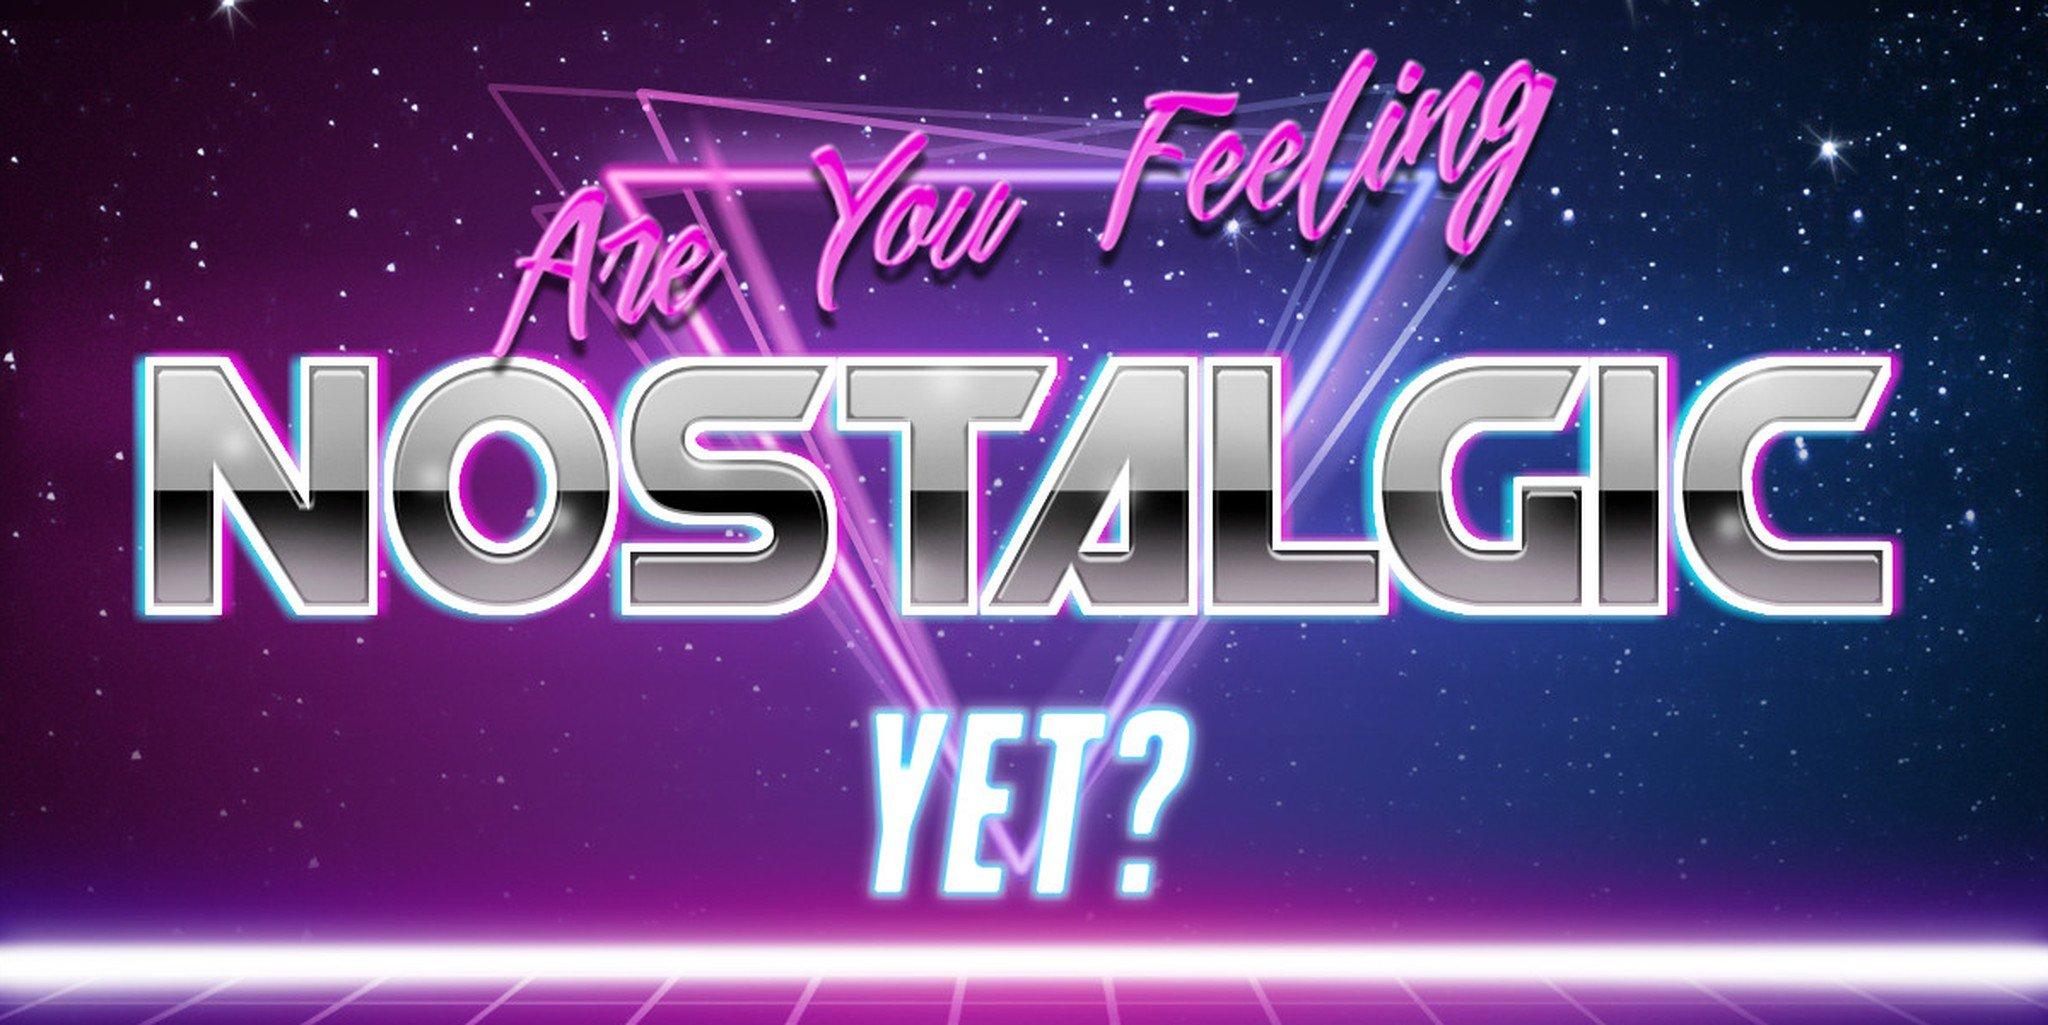 This '80s Aesthetic Text Generator Is Pretty Rad and Totally